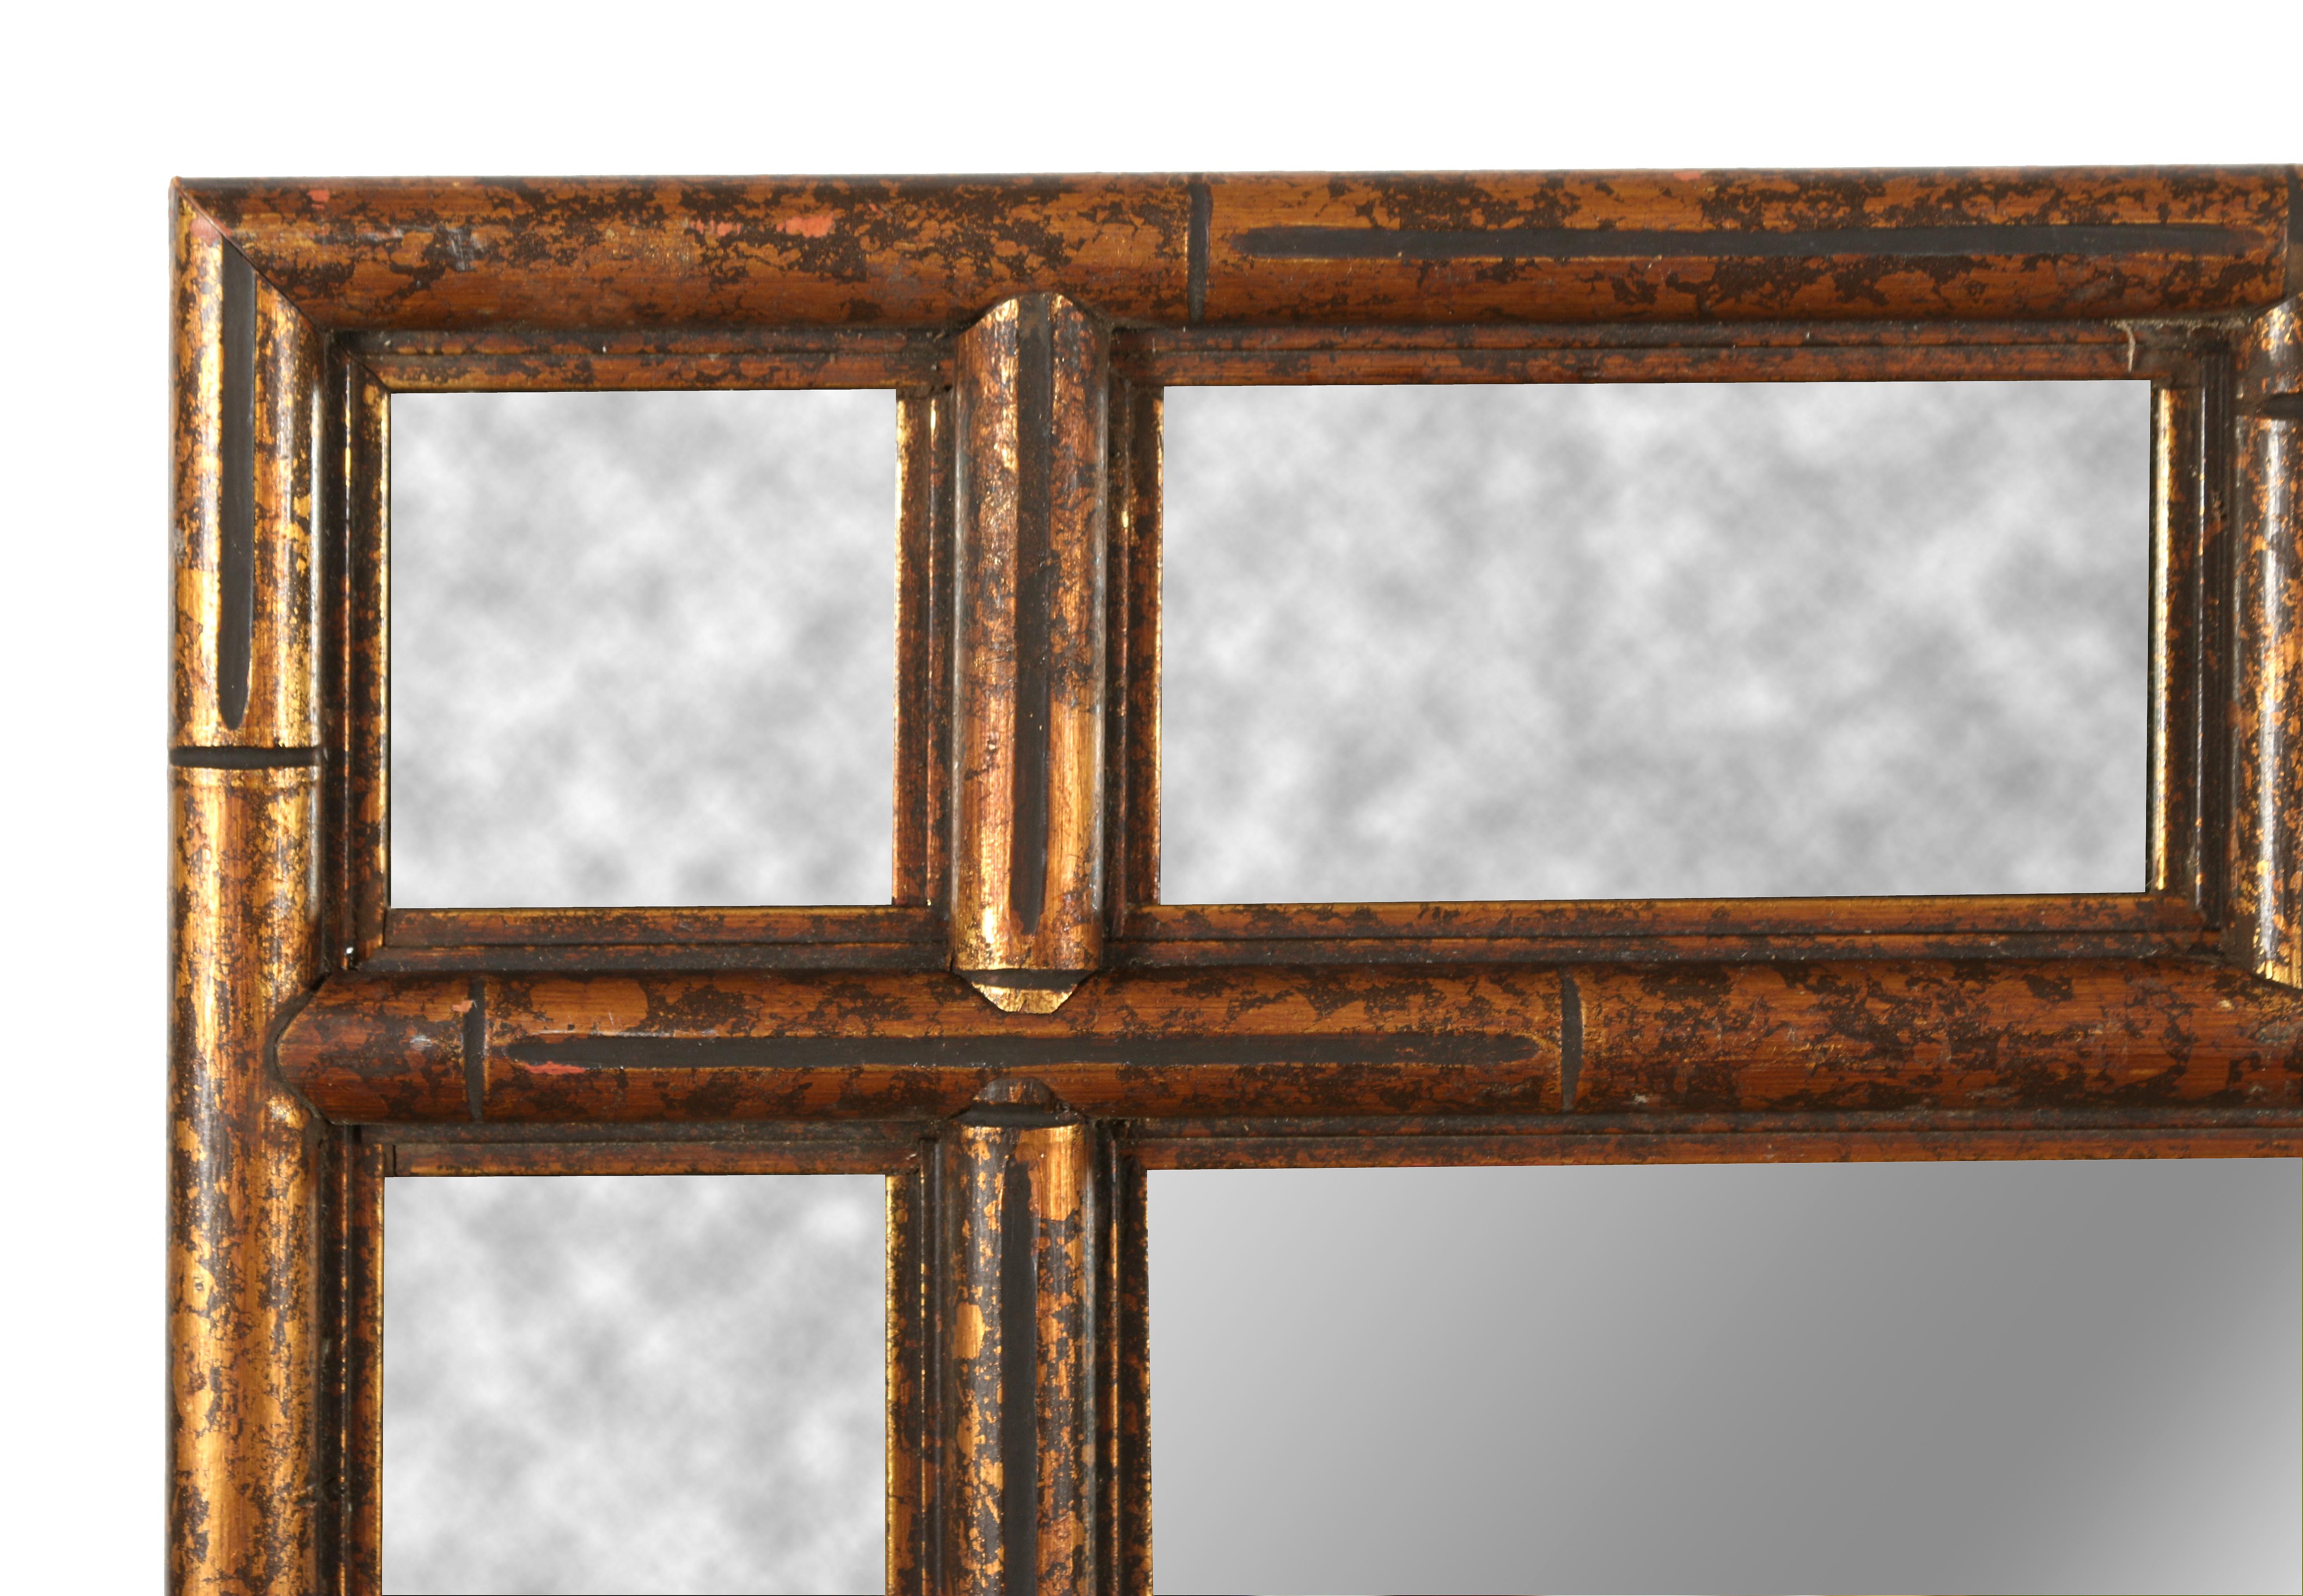 A large faux bamboo mirror in a gilt wood finish. This piece has a lot of personality and would look great in an entrance, dining room or anywhere!